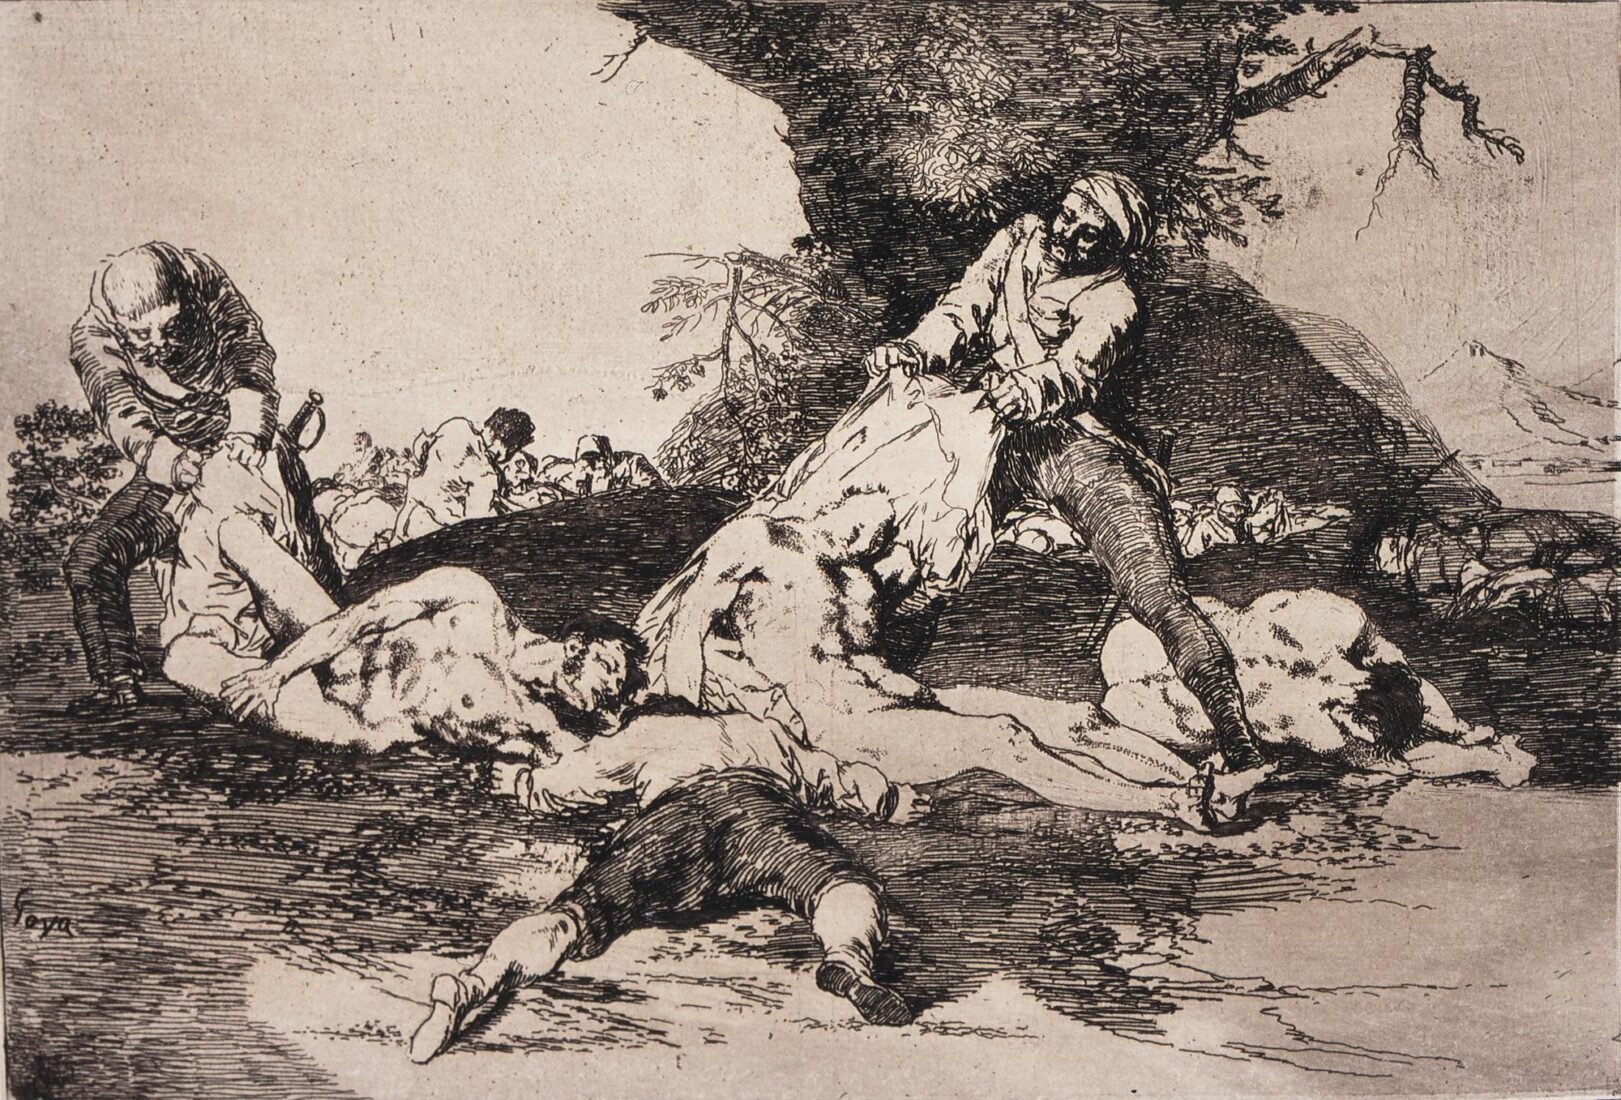 They make use of them. (Se aprovechan) - Goya y Lucientes Francisco